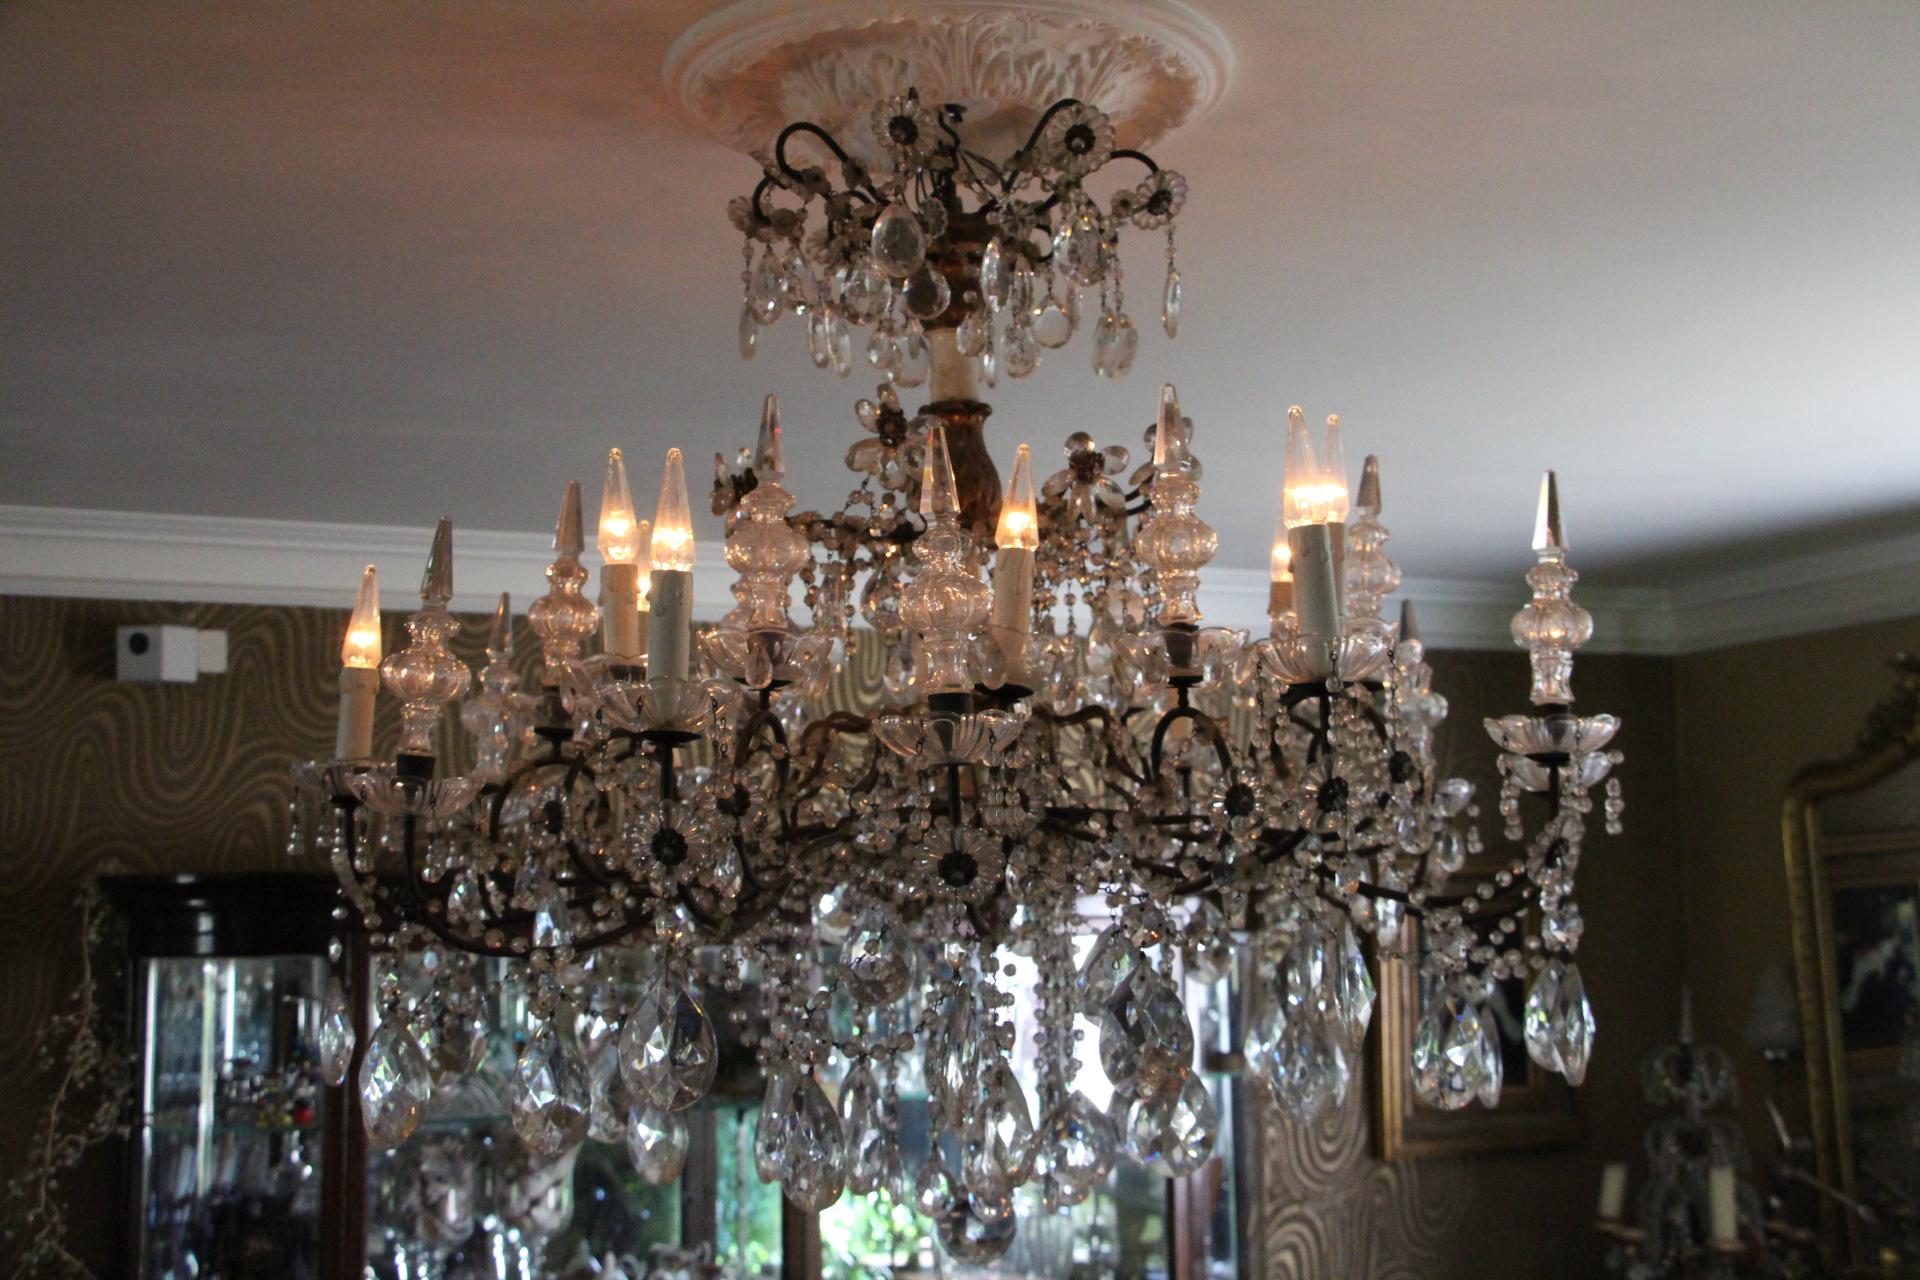 A most charming Italian 19th century pressed patinated metal, giltwood and crystal twelve lights Genovese chandelier. This magnificent chandelier features 2 tiers of 6 lights each. Its giltwood and patinated ivory painted central fut. displays